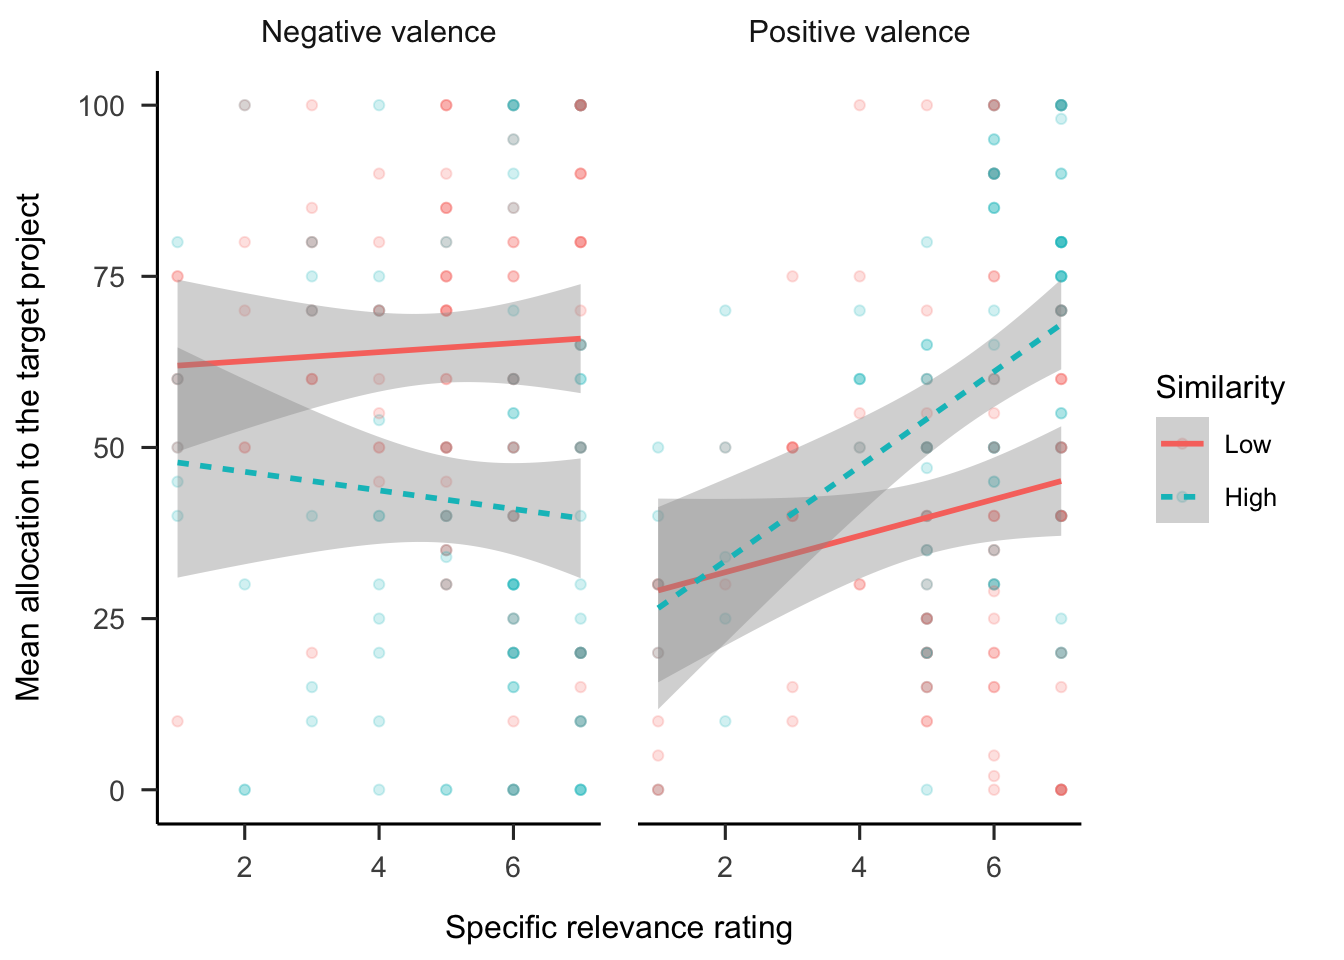 Mean allocation to the target project, by specific relevance rating, similarity condition, and valence condition. LOESS method was used for smoothing over trials and the shading represents 95% confidence intervals. Raw data are plotted in the background.